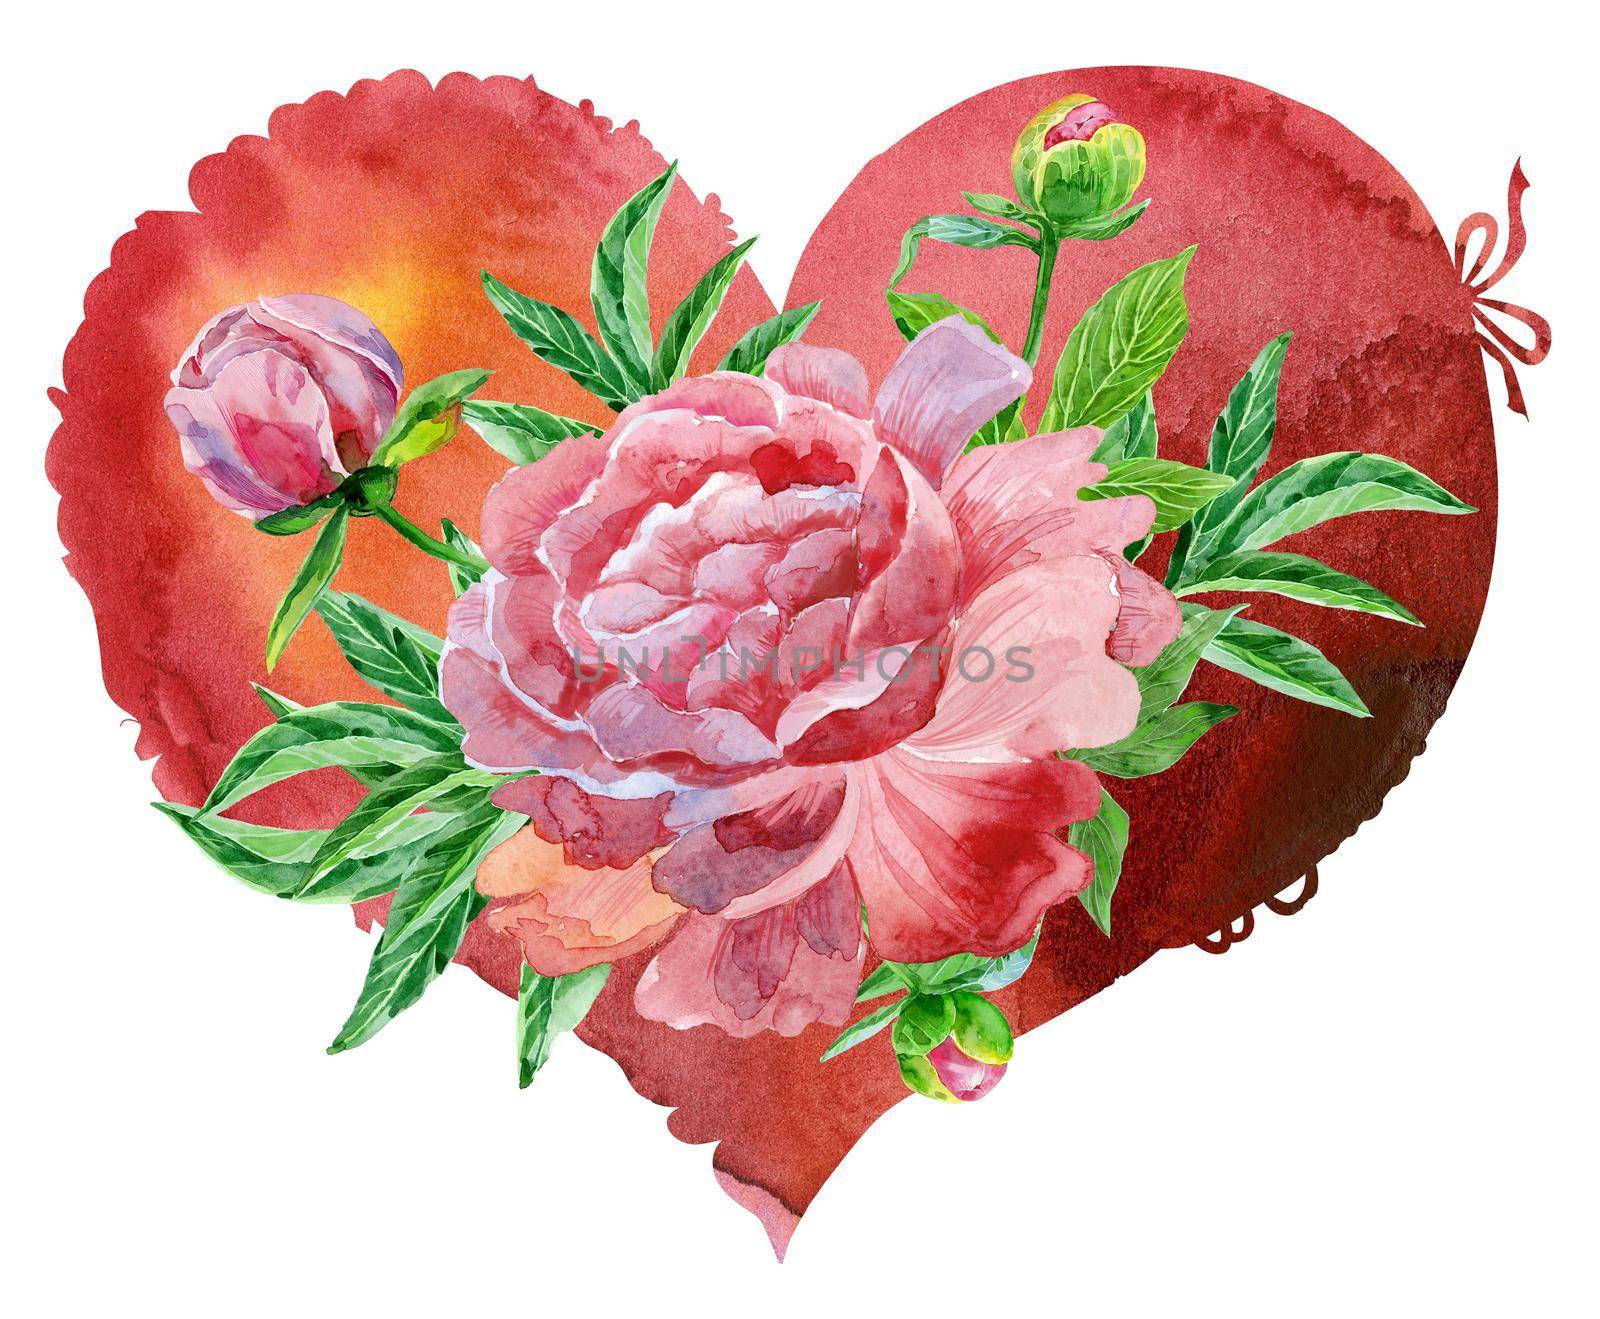 watercolor red heart with pink peonies by NataOmsk